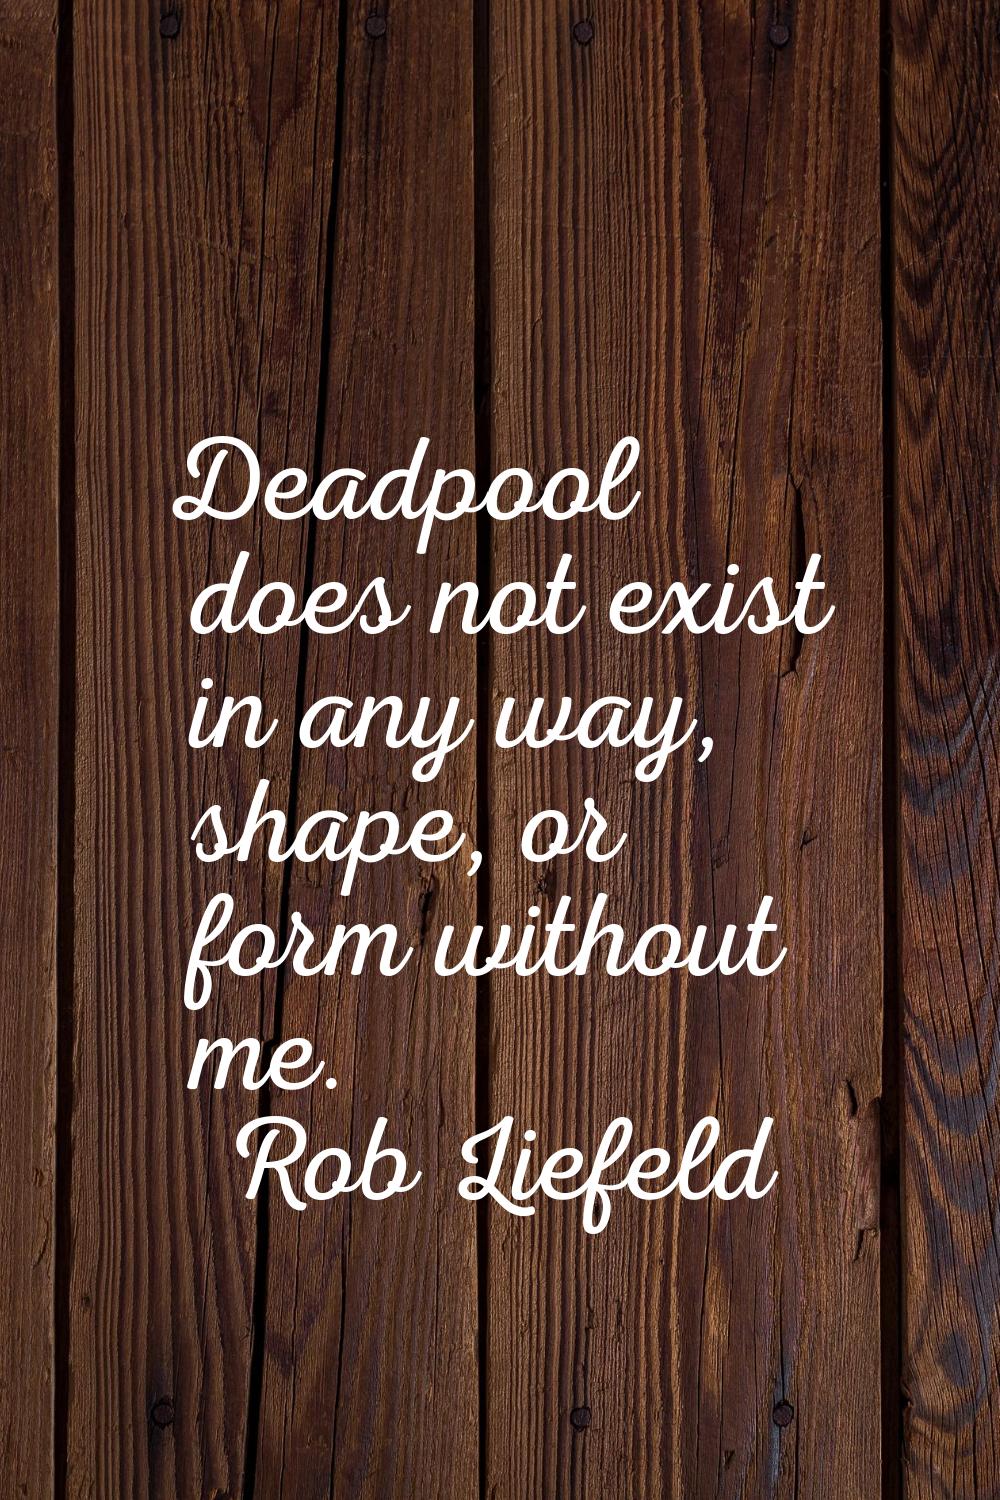 Deadpool does not exist in any way, shape, or form without me.